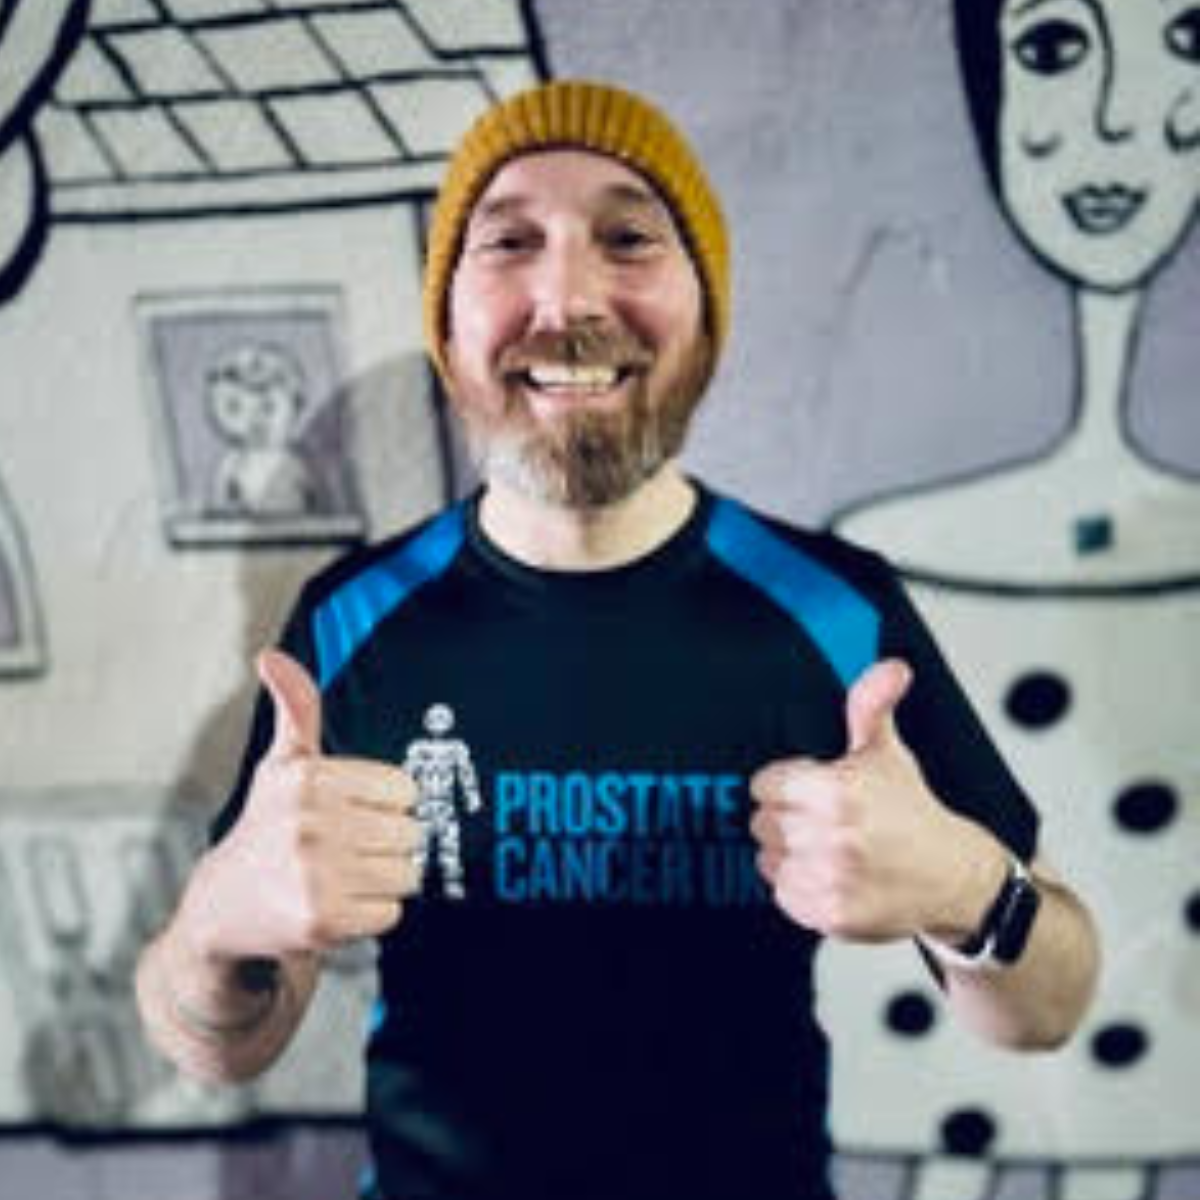 Plymouth bus driver Casey takes on running challenge to raise funds for Prostate Cancer UK